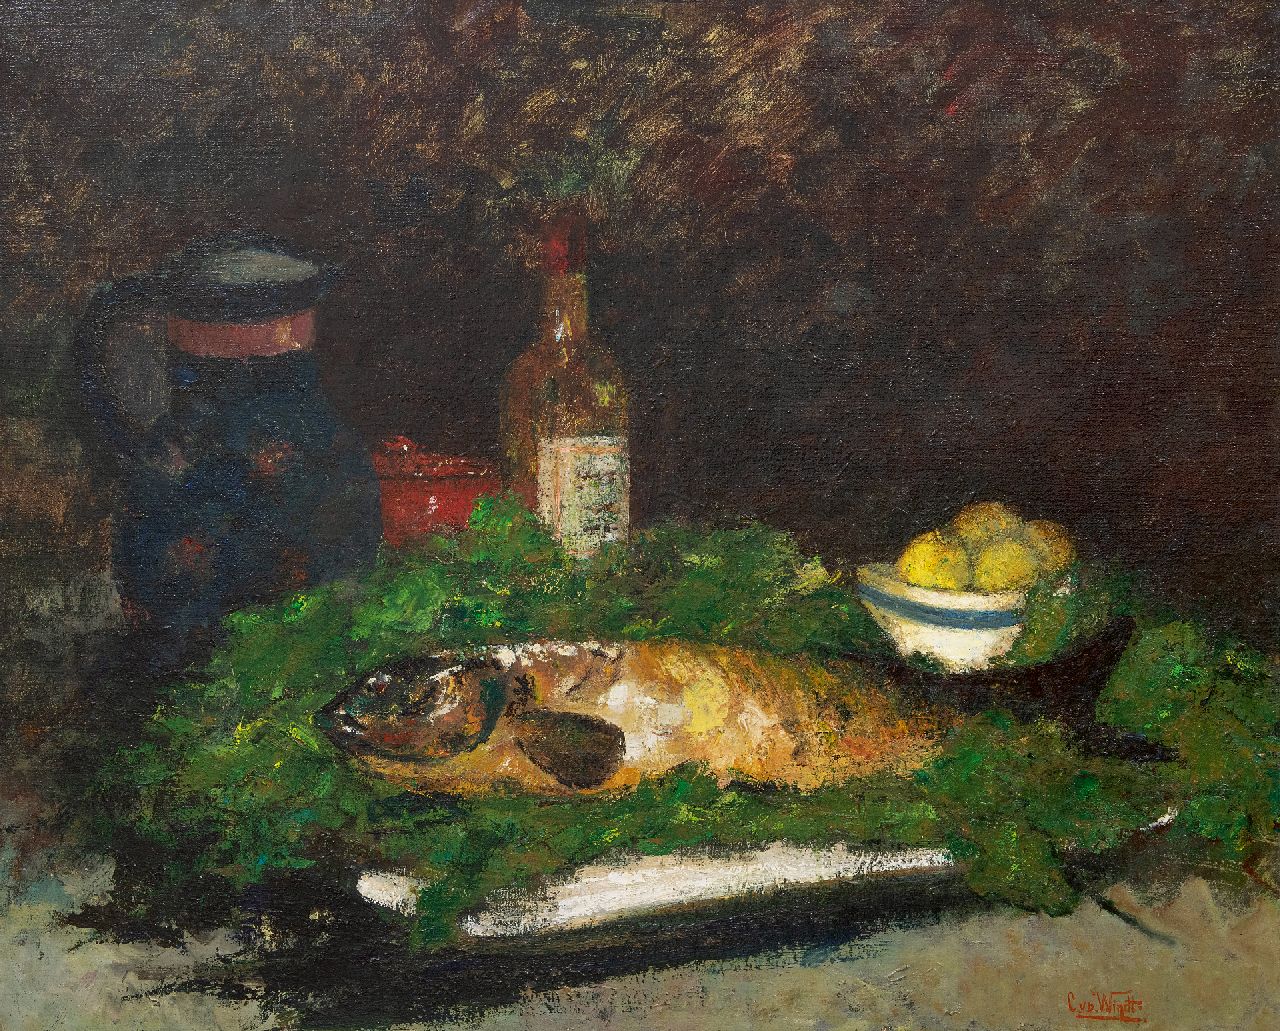 Windt Ch. van der | Christophe 'Chris' van der Windt | Paintings offered for sale | Still life with a fish, fruit and a wine bottle, oil on canvas 71.3 x 86.0 cm, signed l.r.